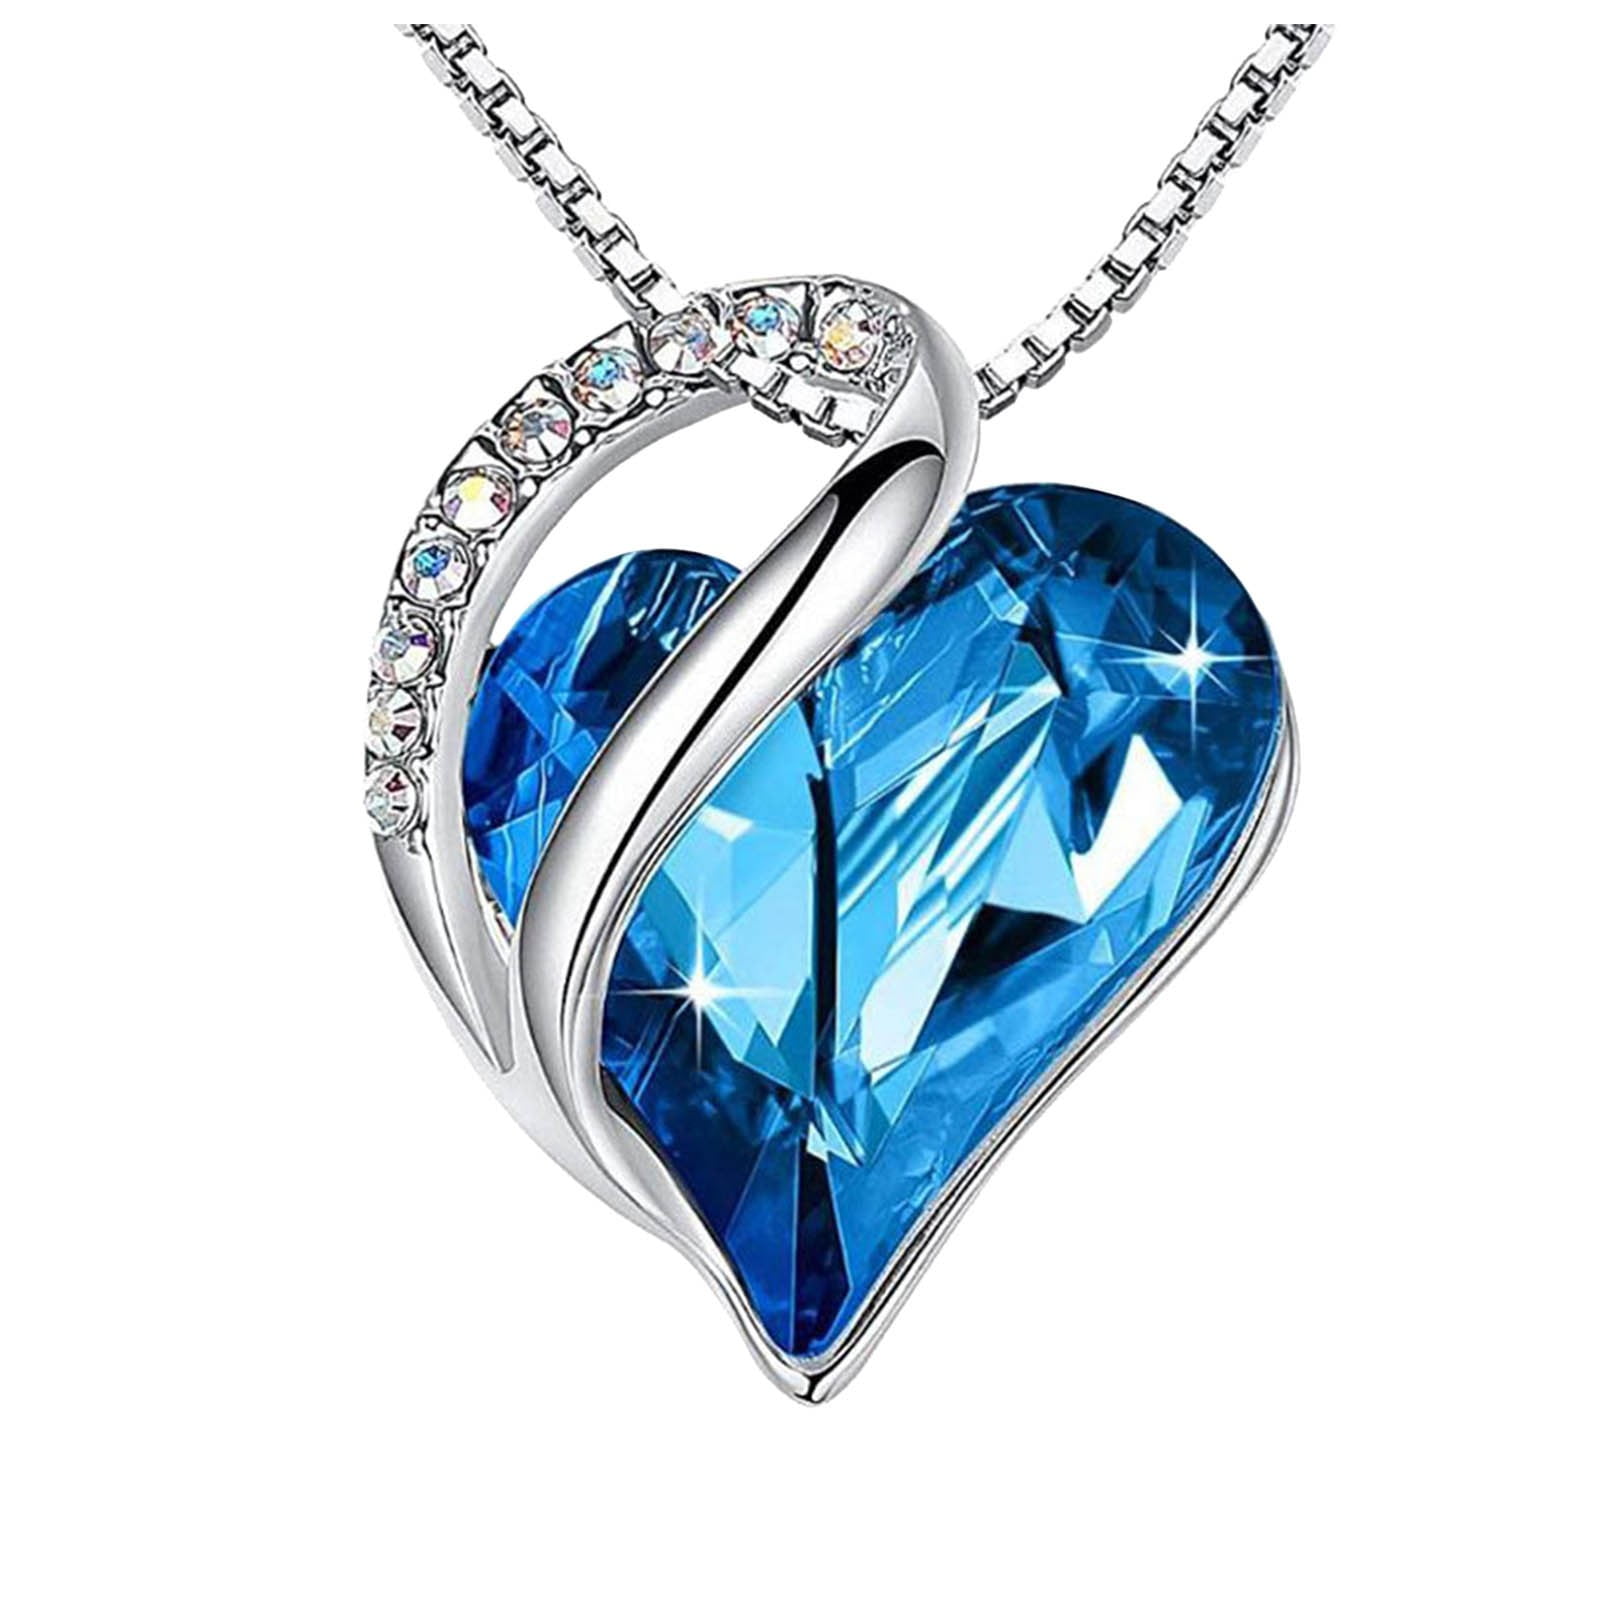 Fashion Girl Womens Gemstone Chain Crystal Heart Necklace Pendant Jewelry Gift